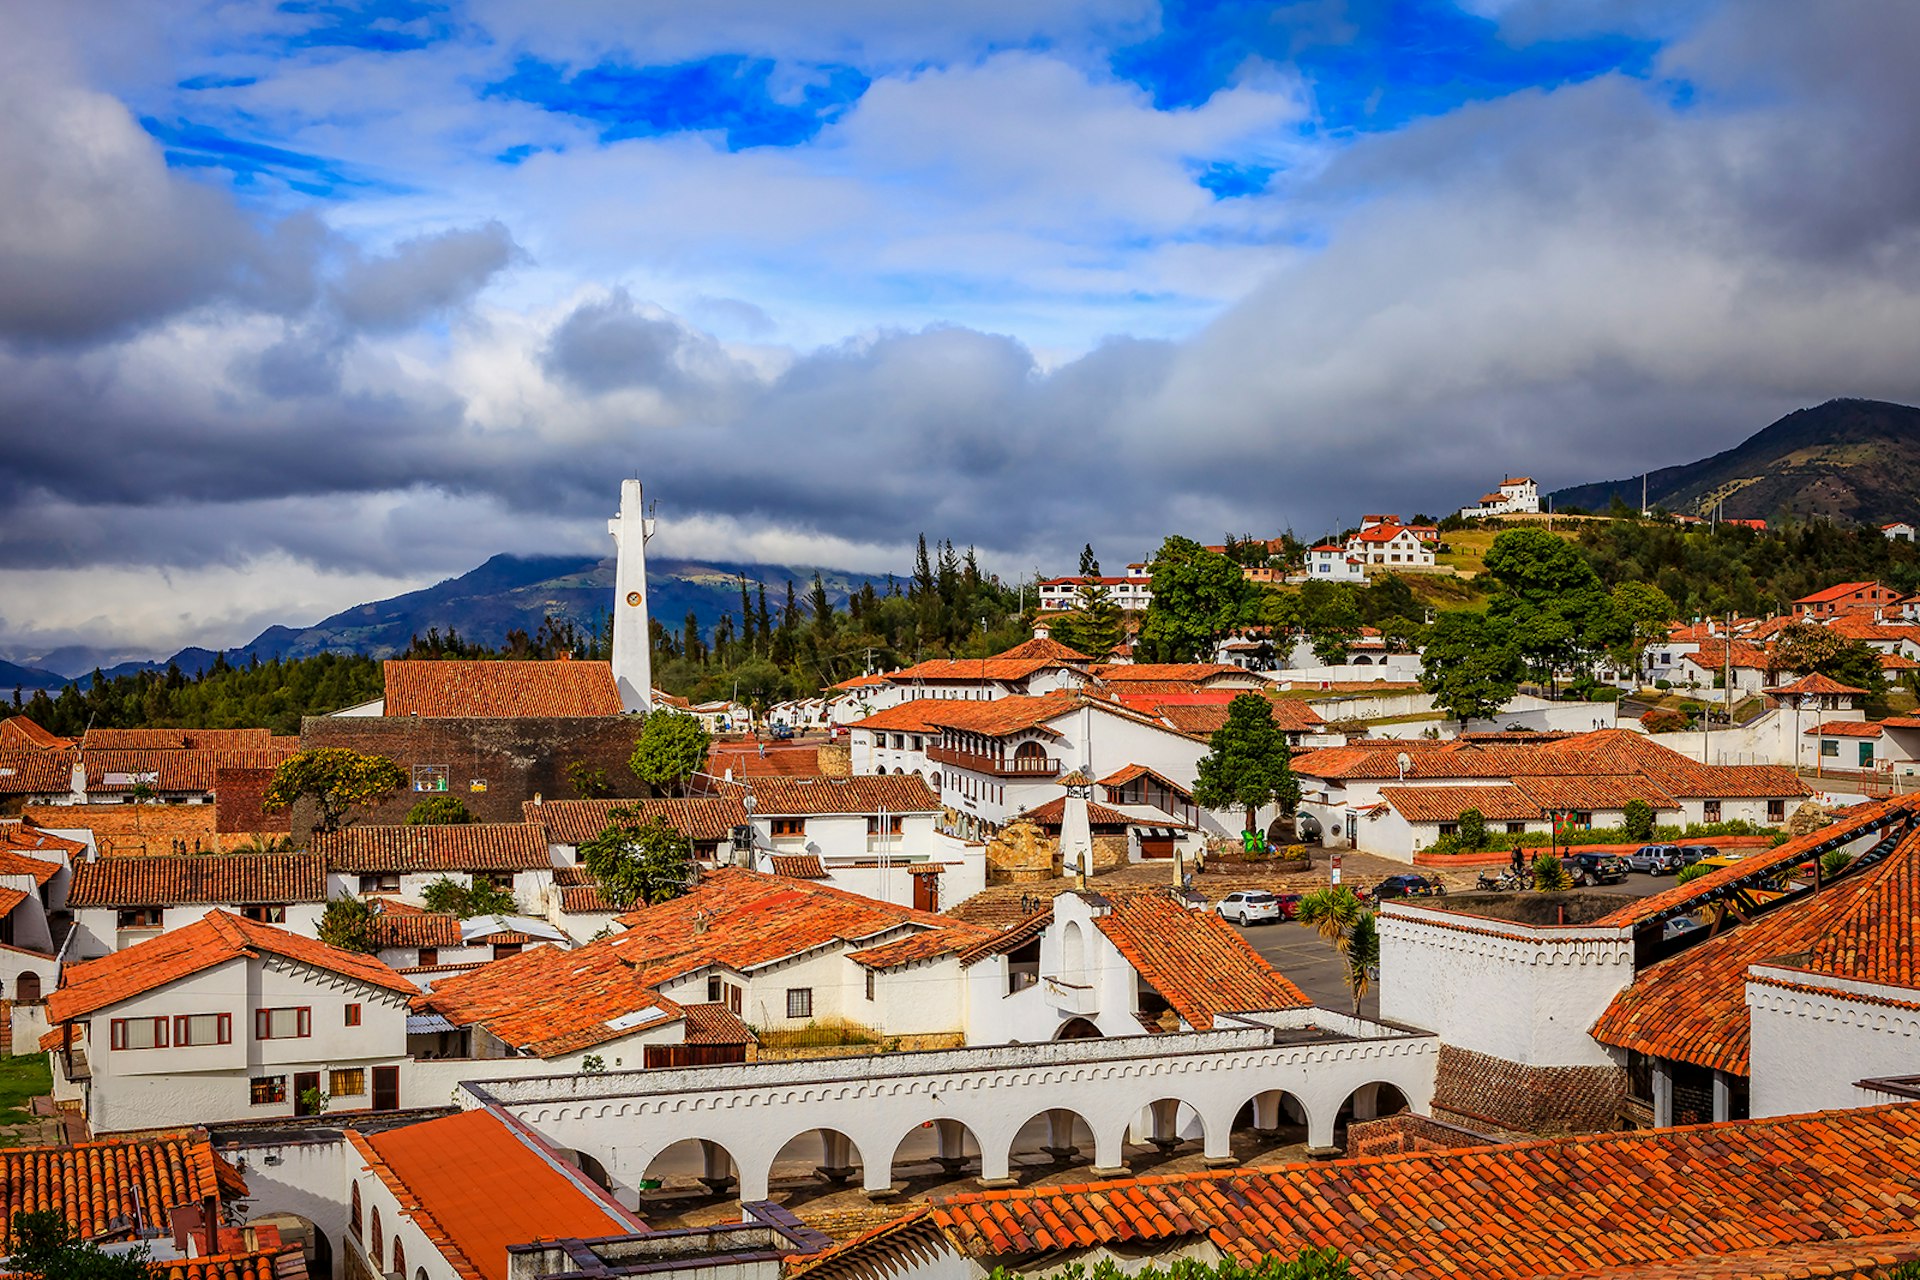 A collection of white buildings with terracotta roofs in Guatavita, Colombia